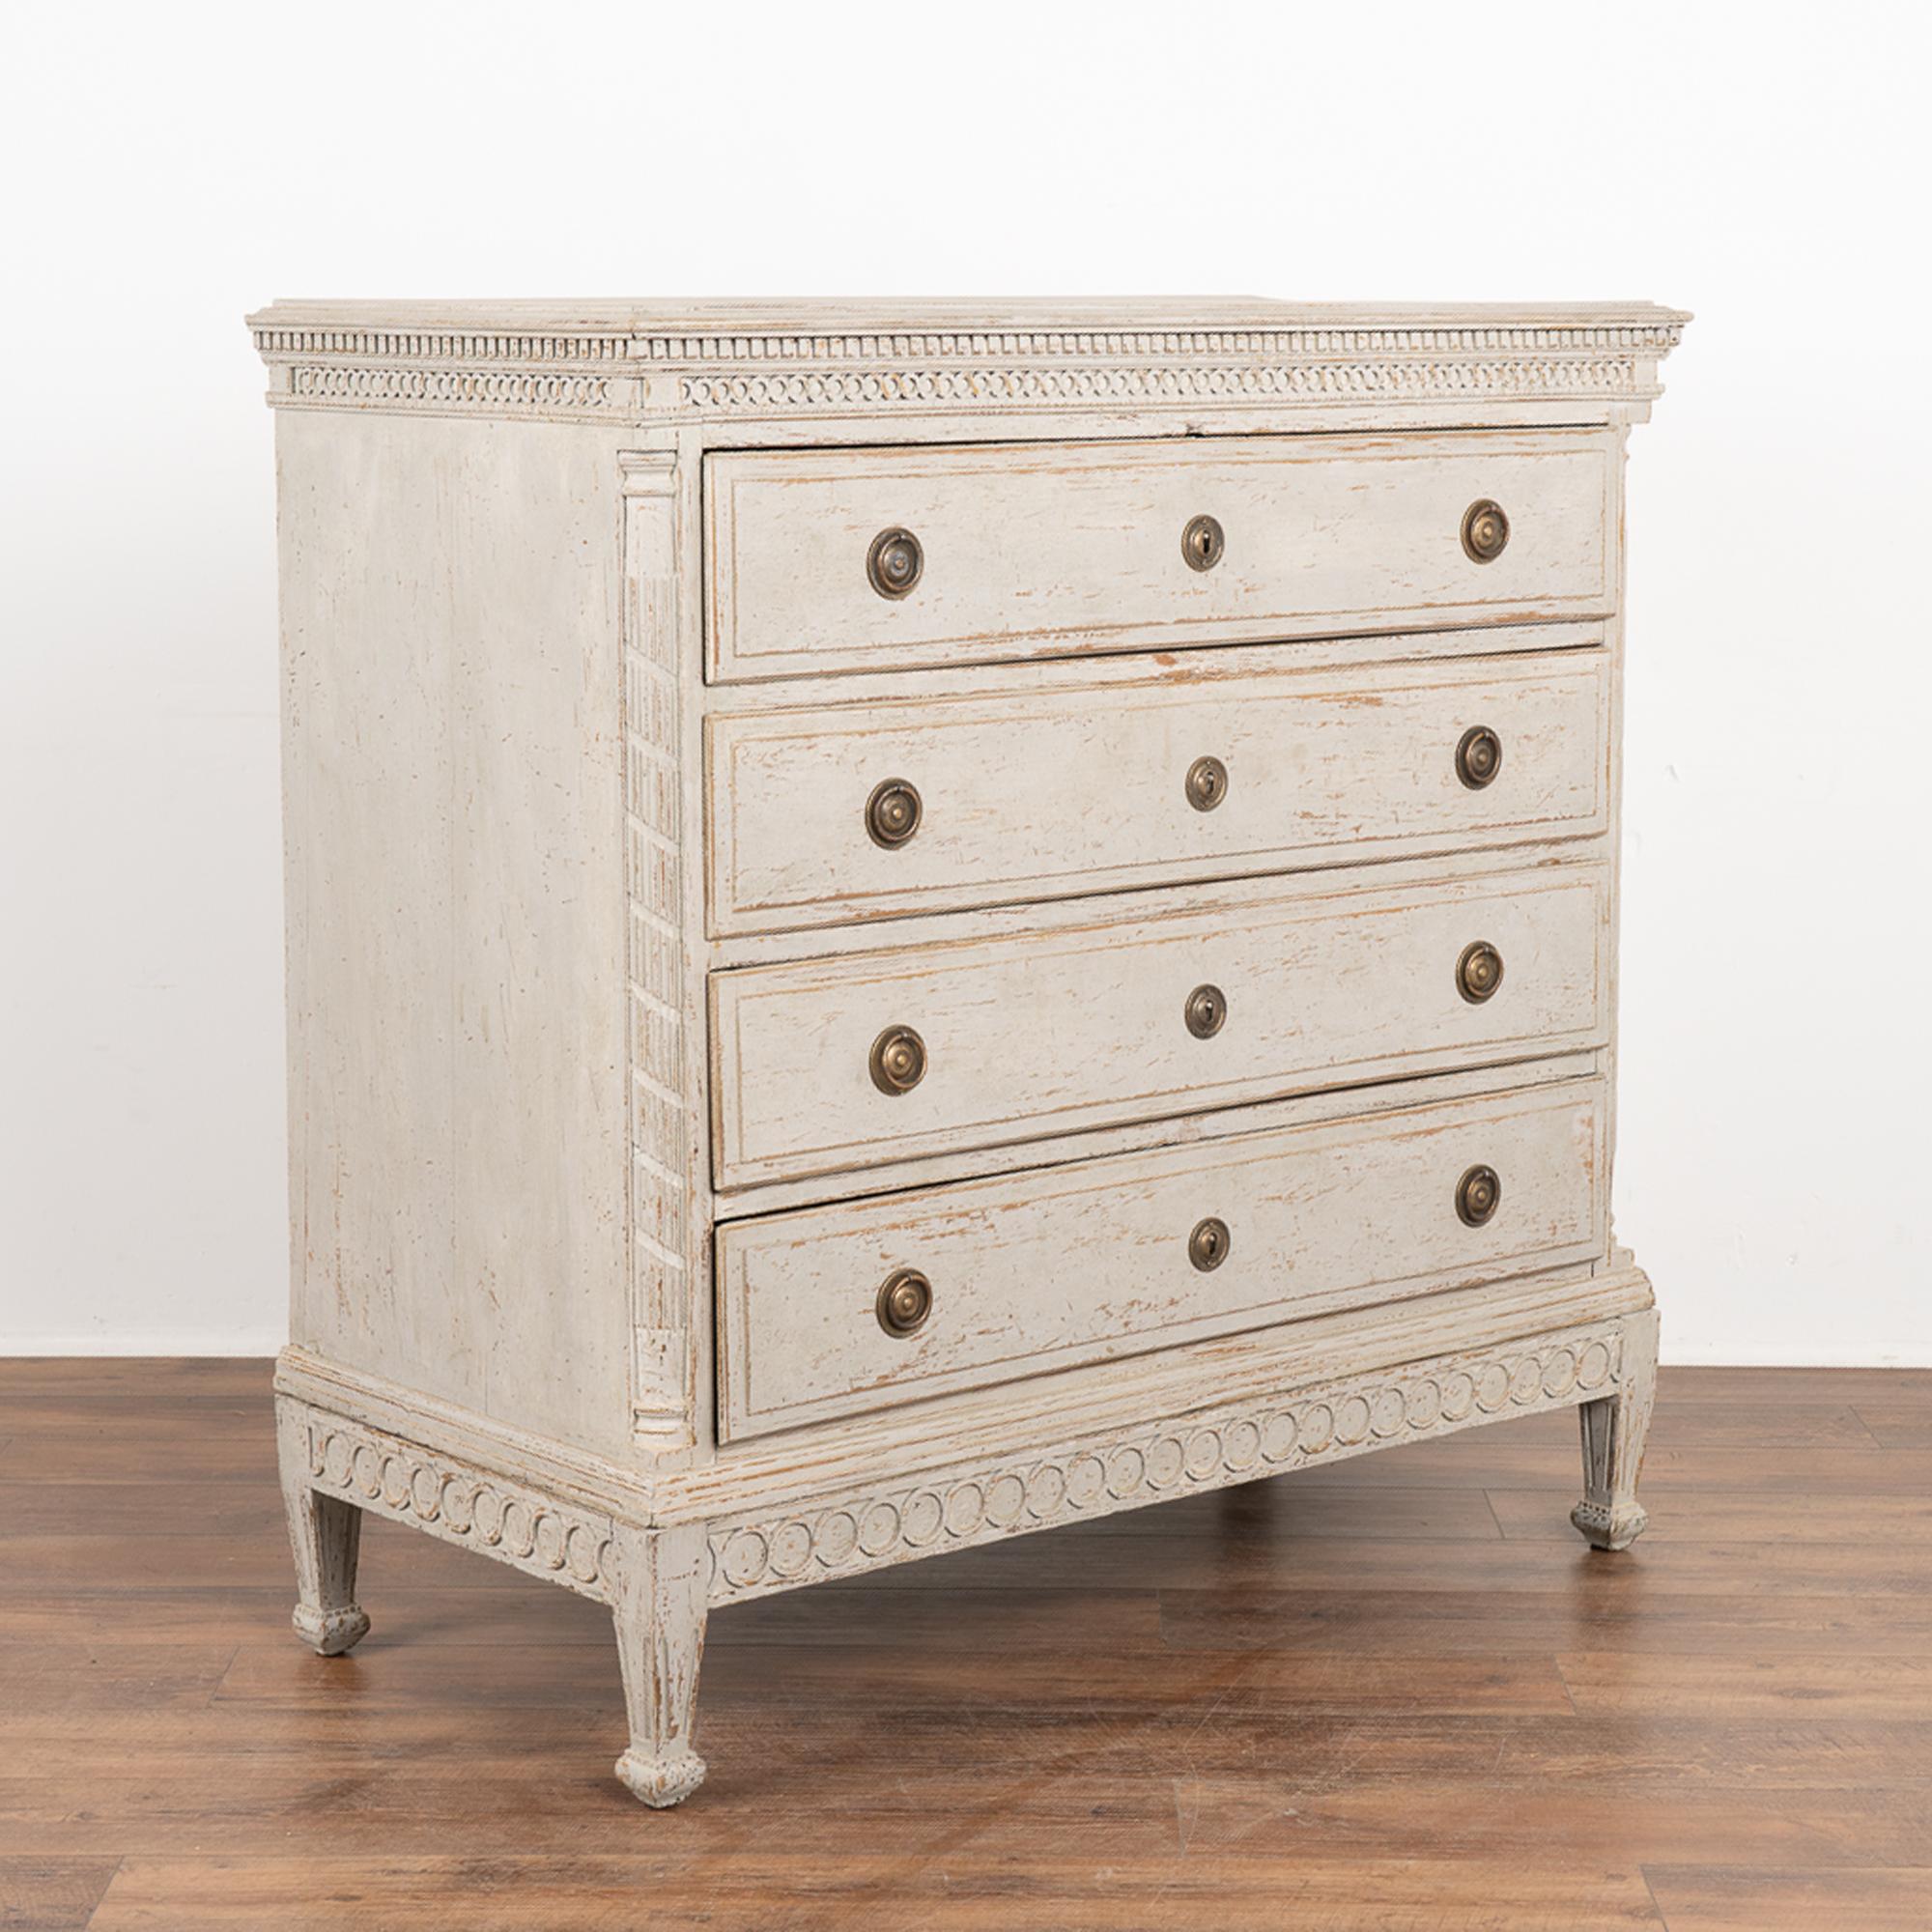 Large pine chest of four drawers with dentil molding and decorative carving along top and skirt. 
The newer, professionally applied soft gray painted layered finish adds a touch of grace that fits the age of this large chest.
Carved details, fluted